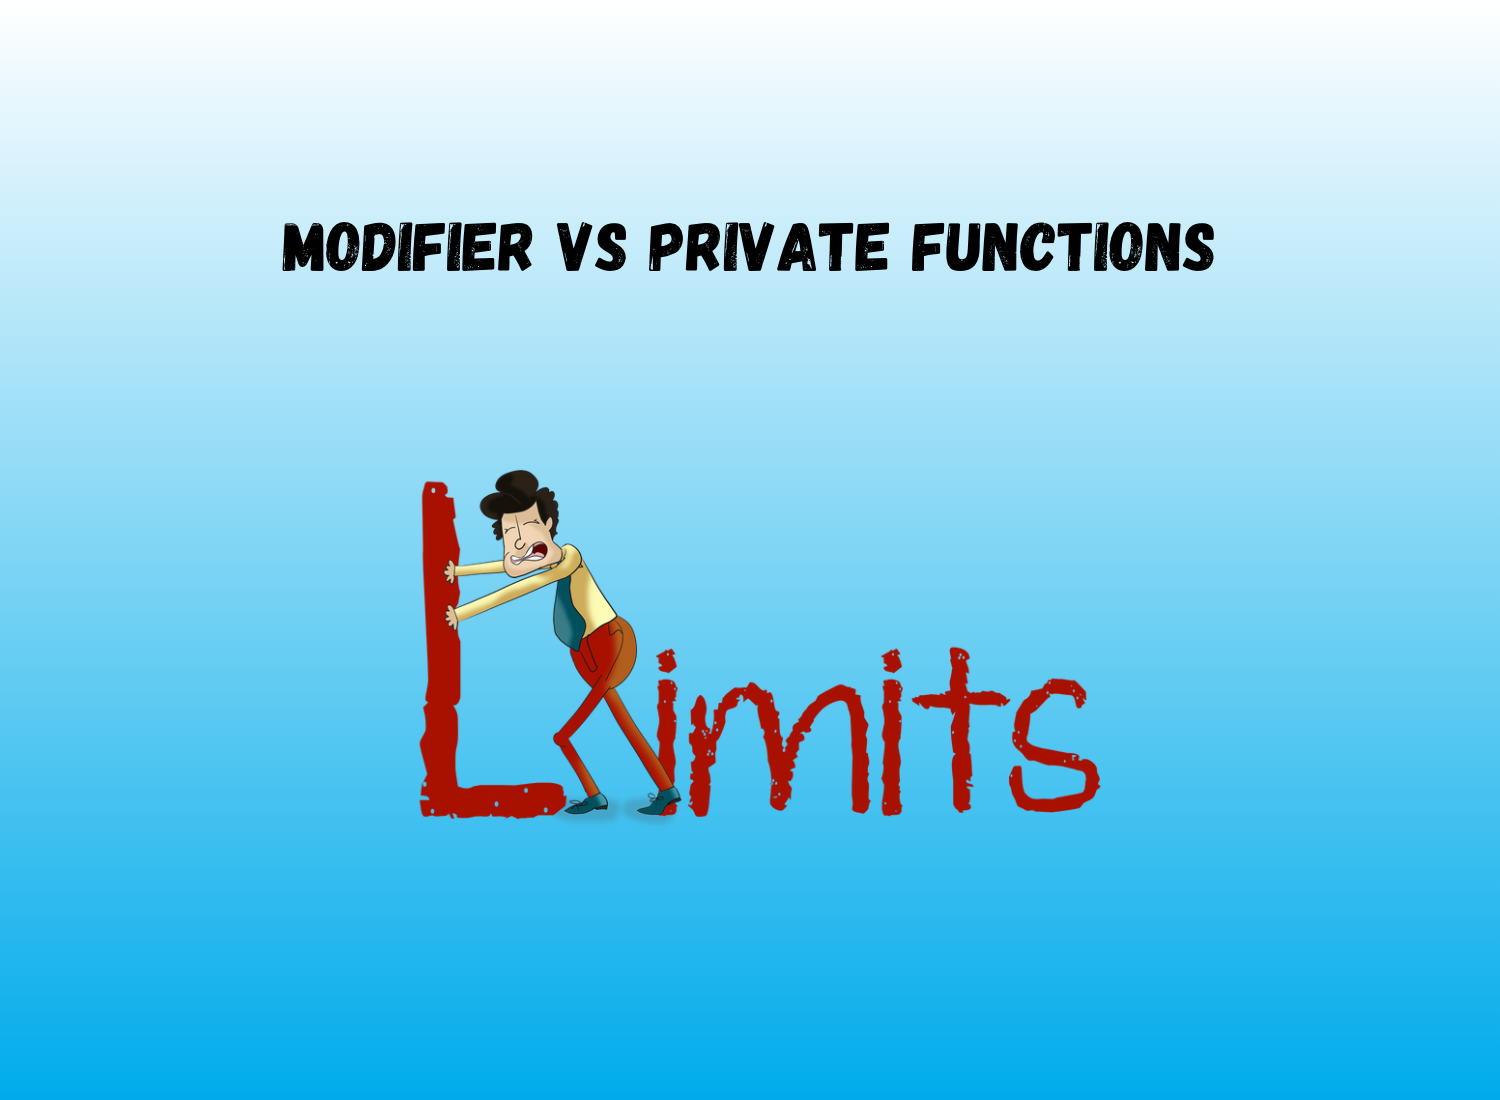 Part II: Replace modifiers with private functions and reduce your contract's size